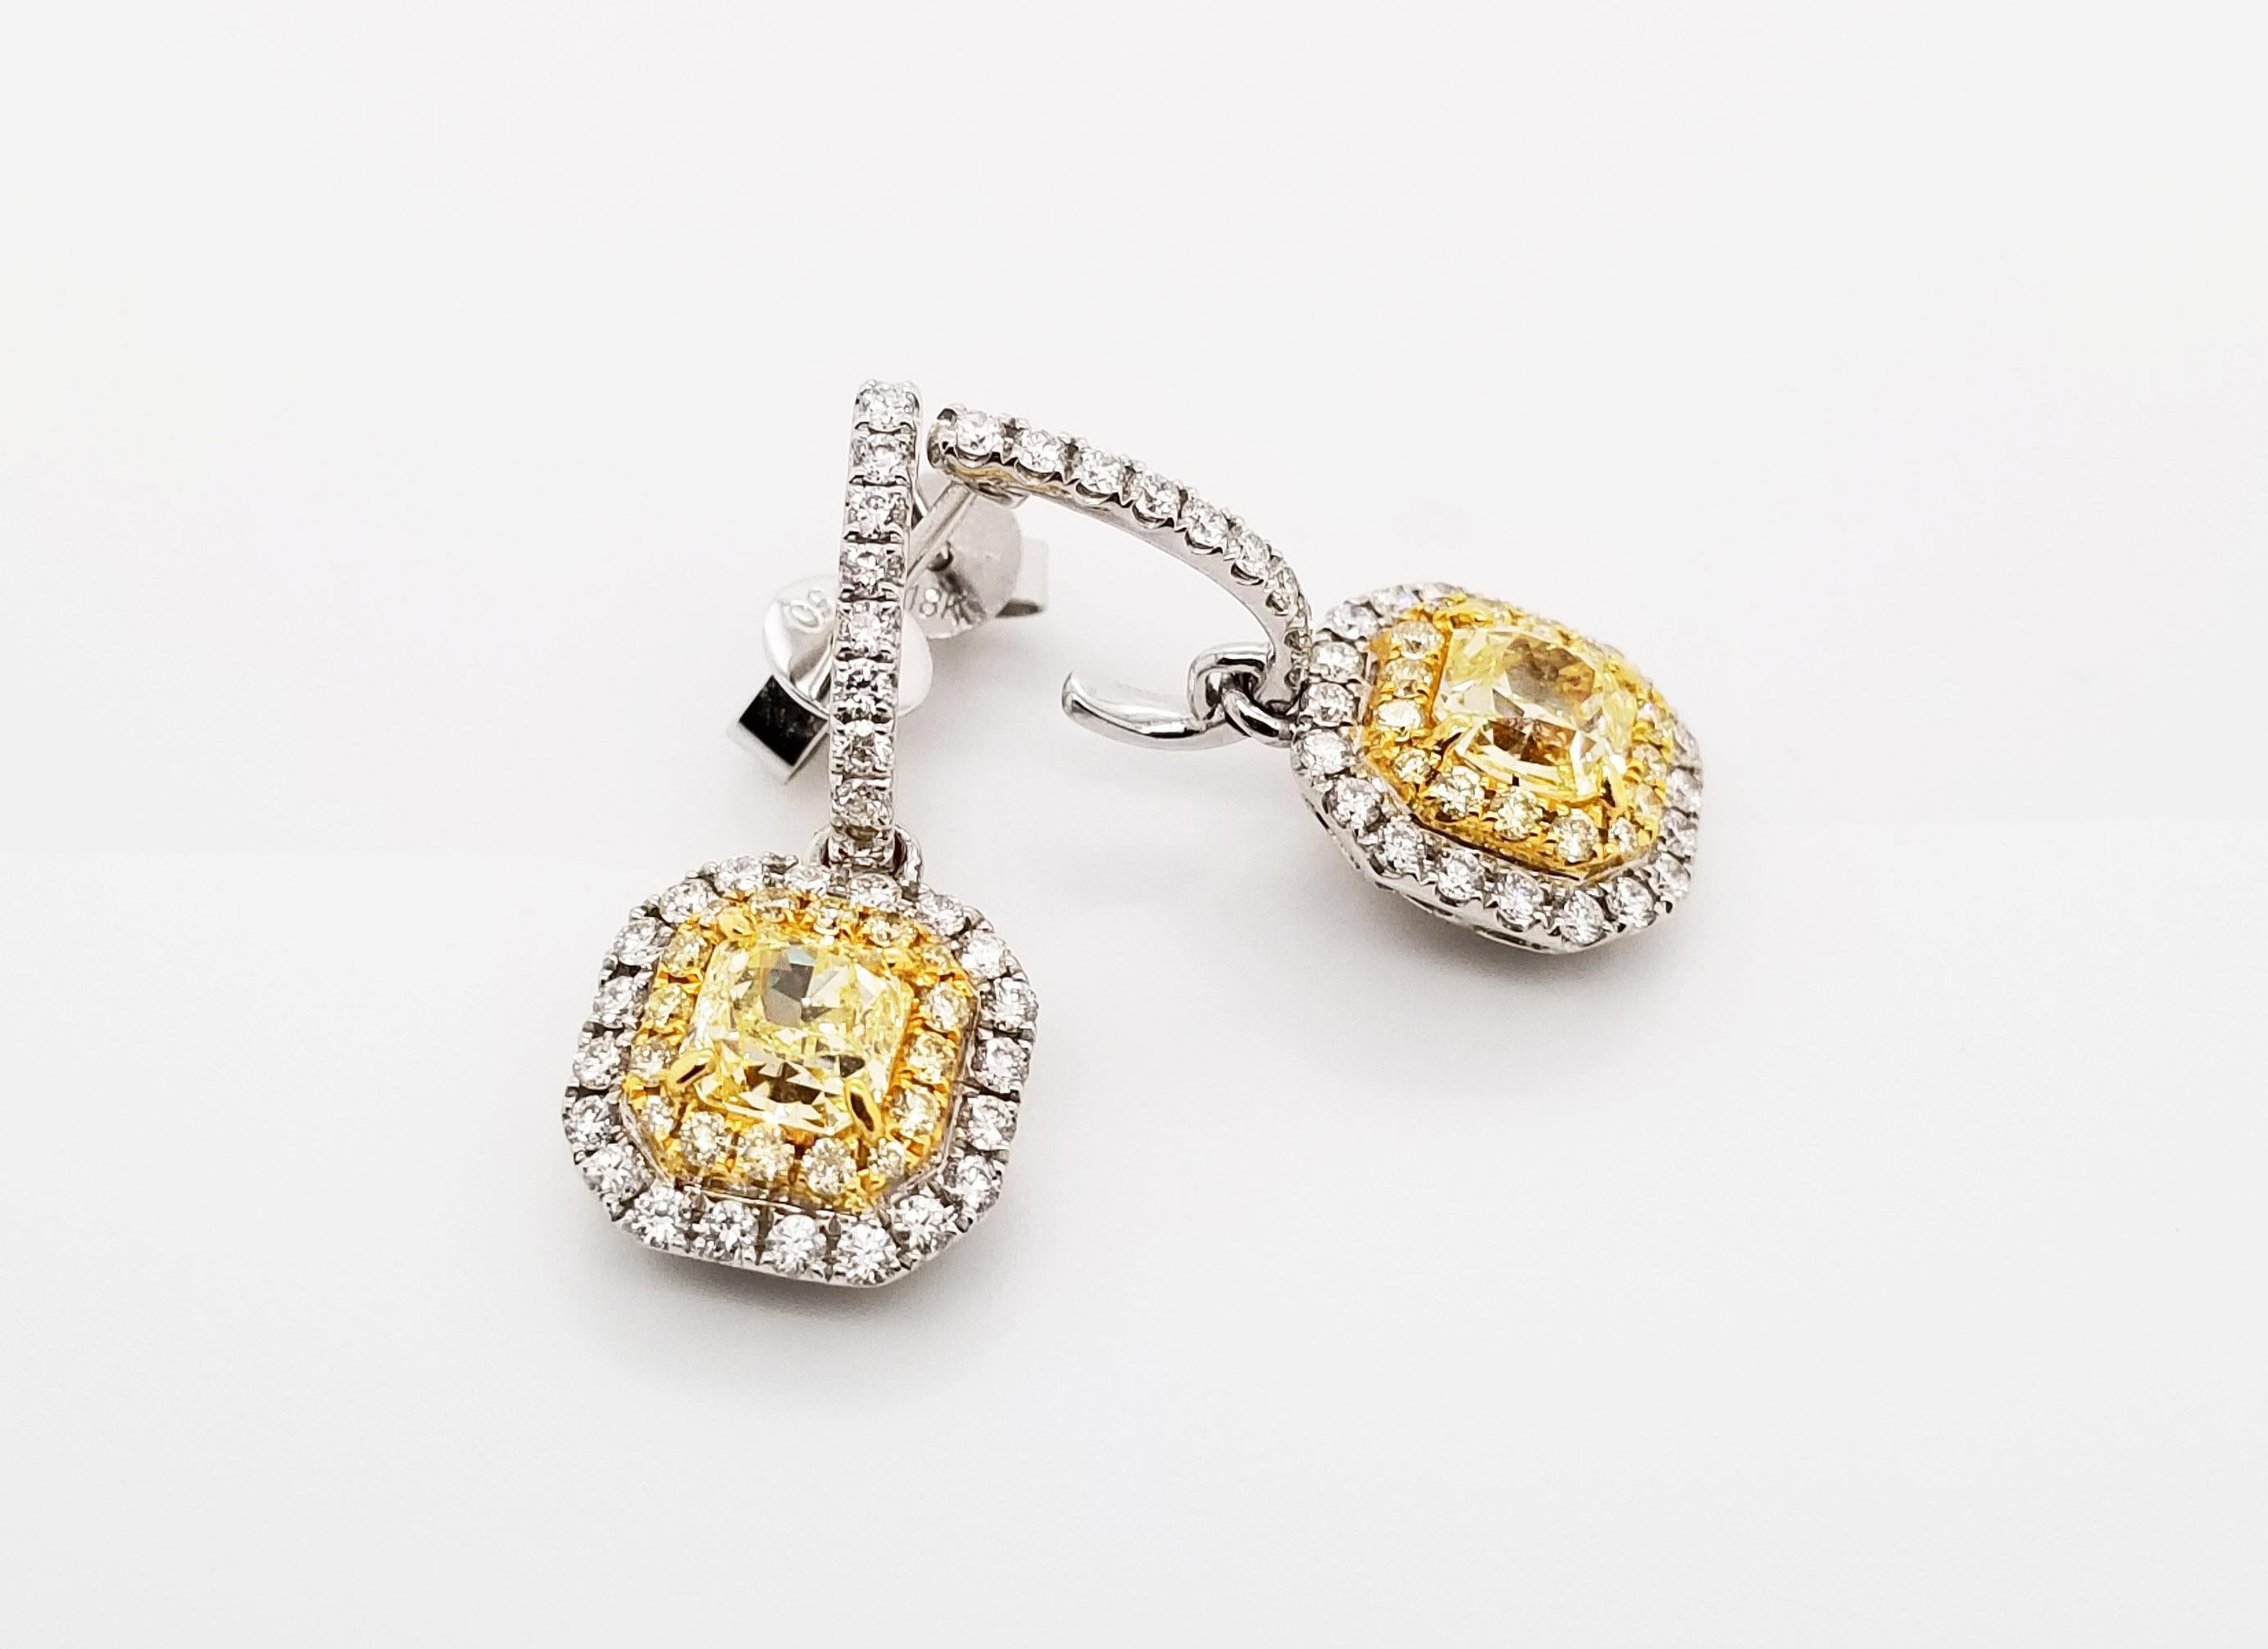 From the Couture Collection at Scarselli, these Fancy Yellow Radiant Cut Diamonds are 0.61 carats each SI2-SI1 clarity. The Yellow Diamonds are simpleness beautiful set up in an 18 karat yellow gold flanked by 0.24carats of yellow diamonds squared